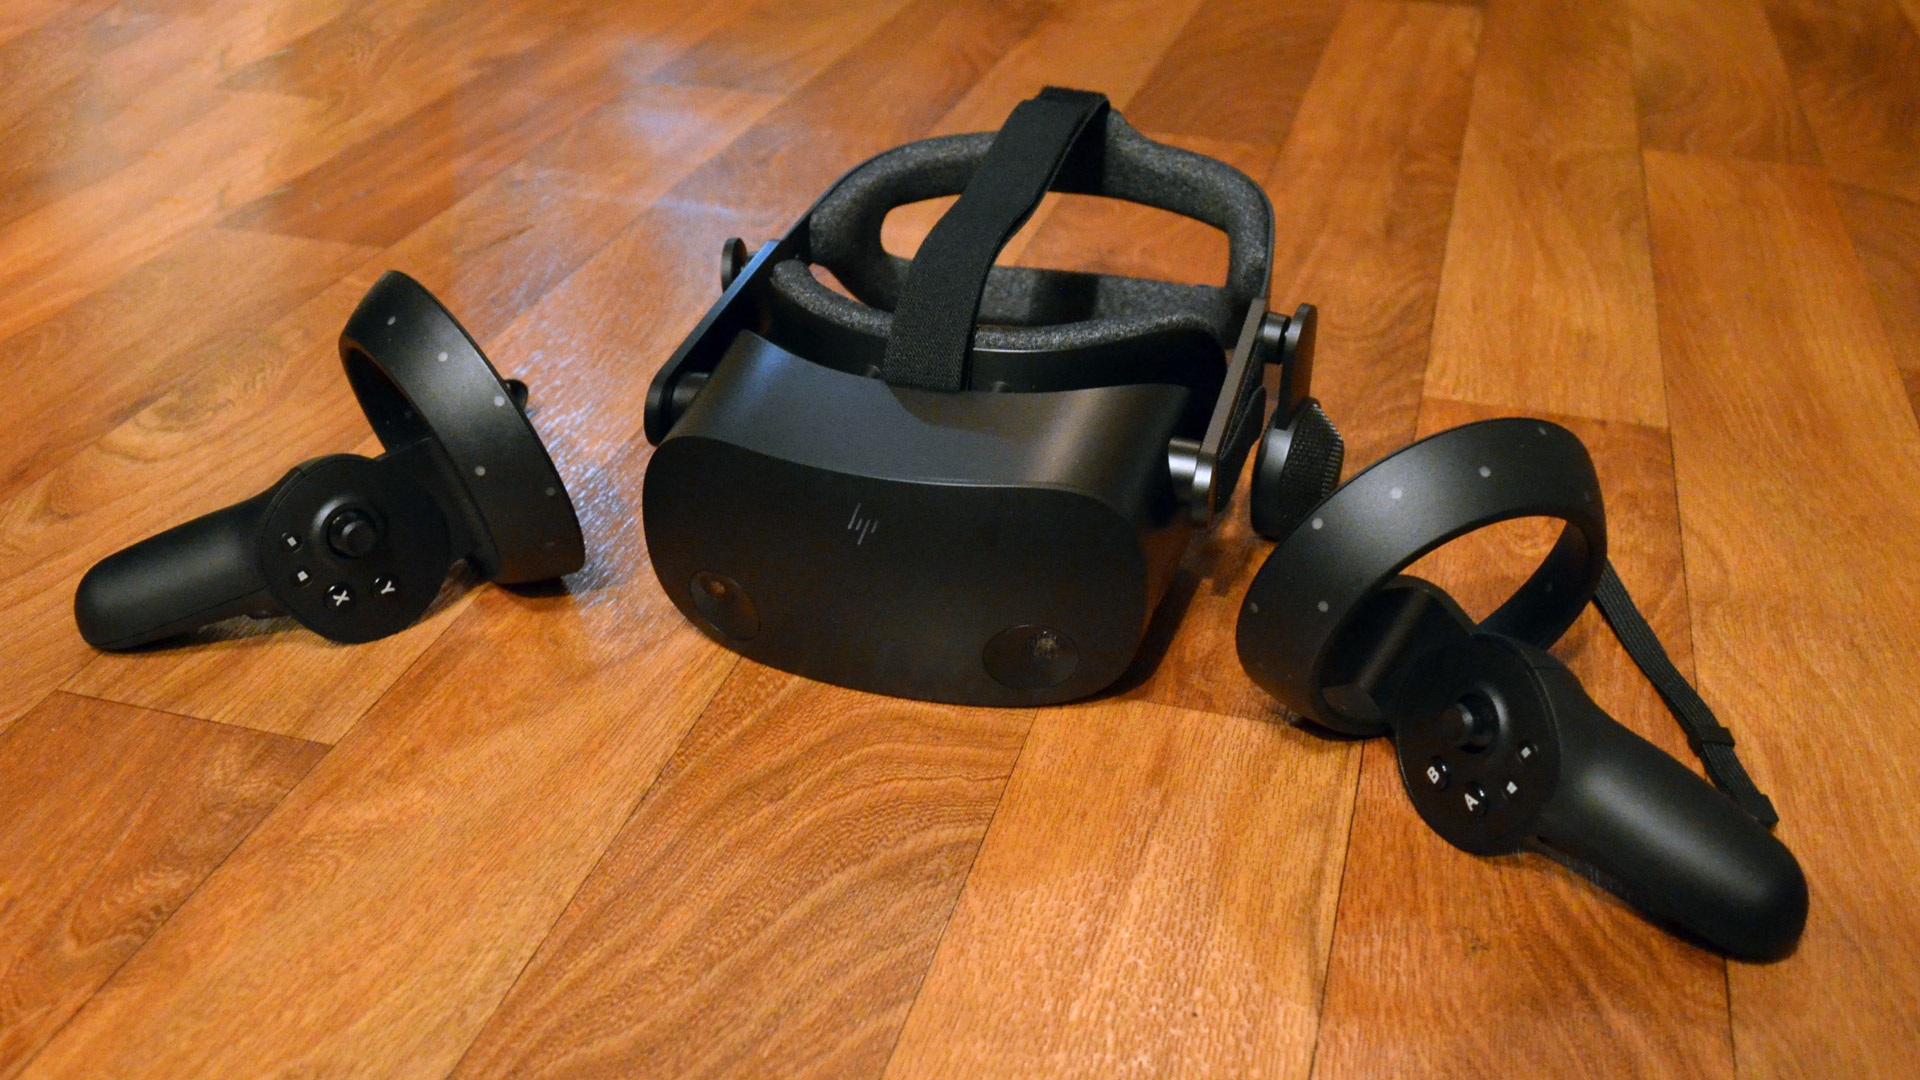 HP Reverb G2: A good Virtual Reality headset capable of carrying inspection, repairing, and designing in Industry 4.0